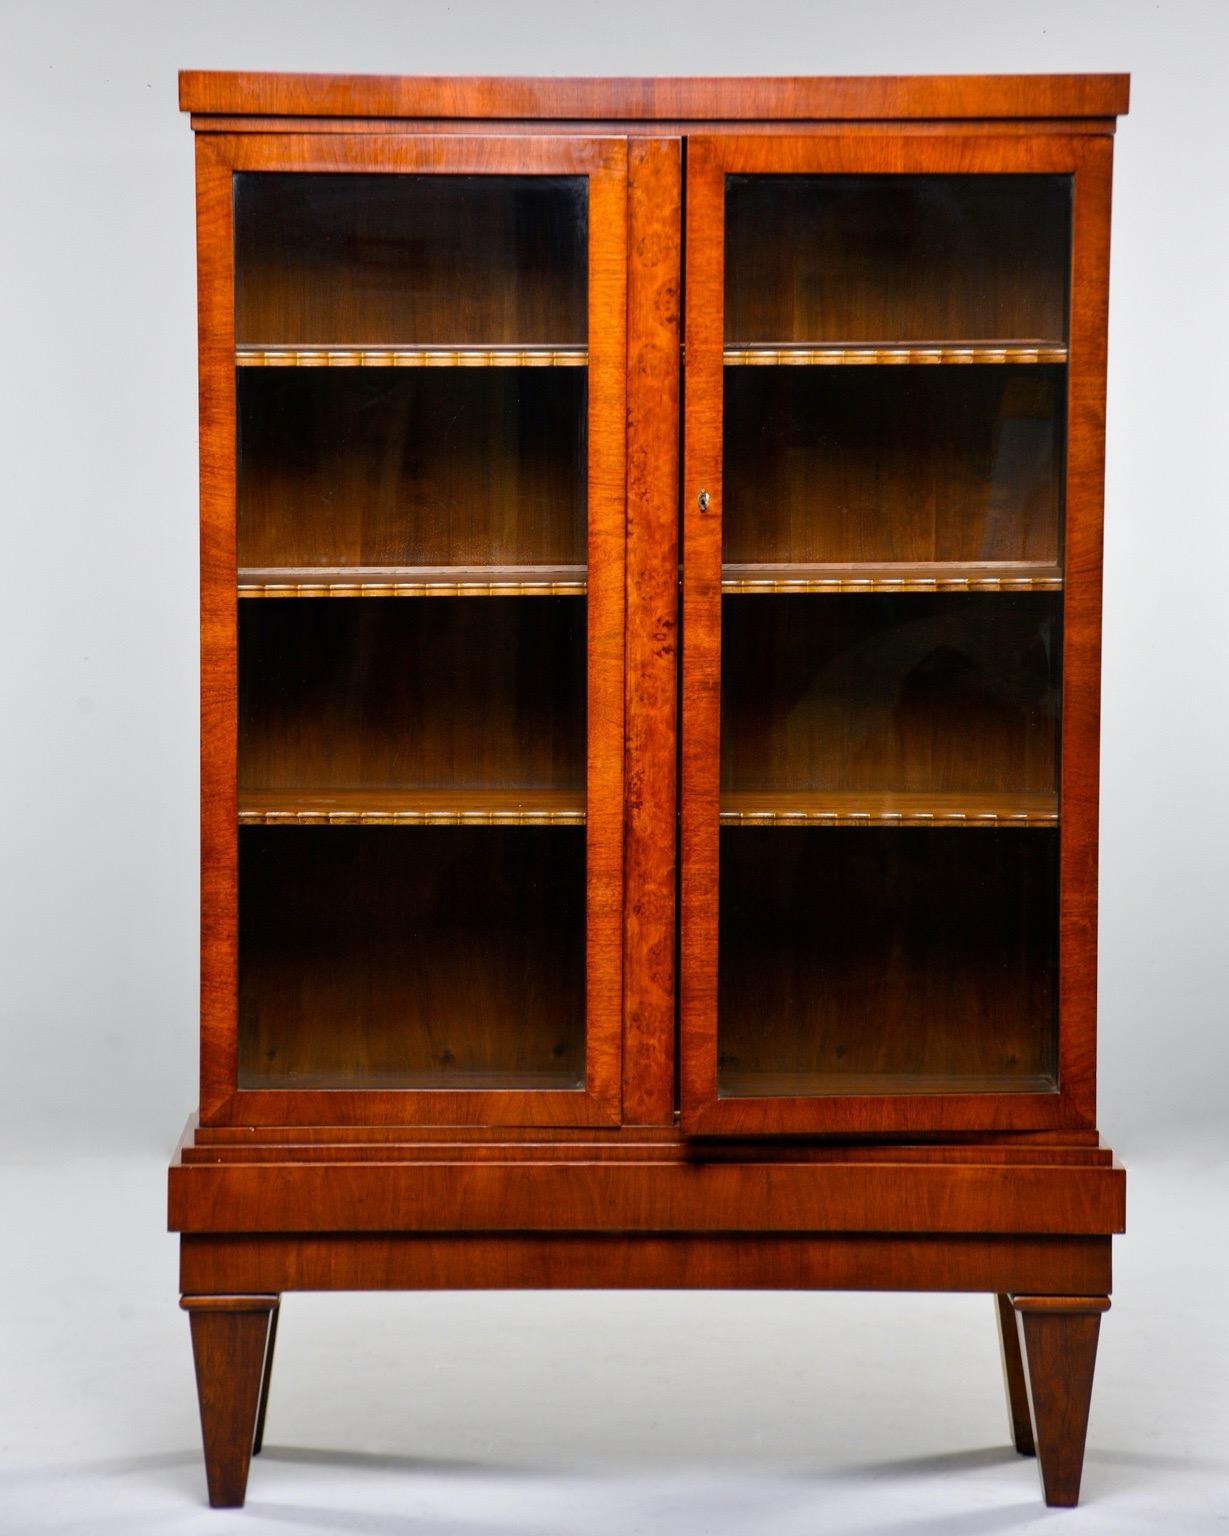 French cabinet or bookcase is nearly 6 feet tall and features two glass-fronted hinged doors that open to compartment with three fixed shelves and sturdy, stepped base, circa 1930s. Unknown maker.